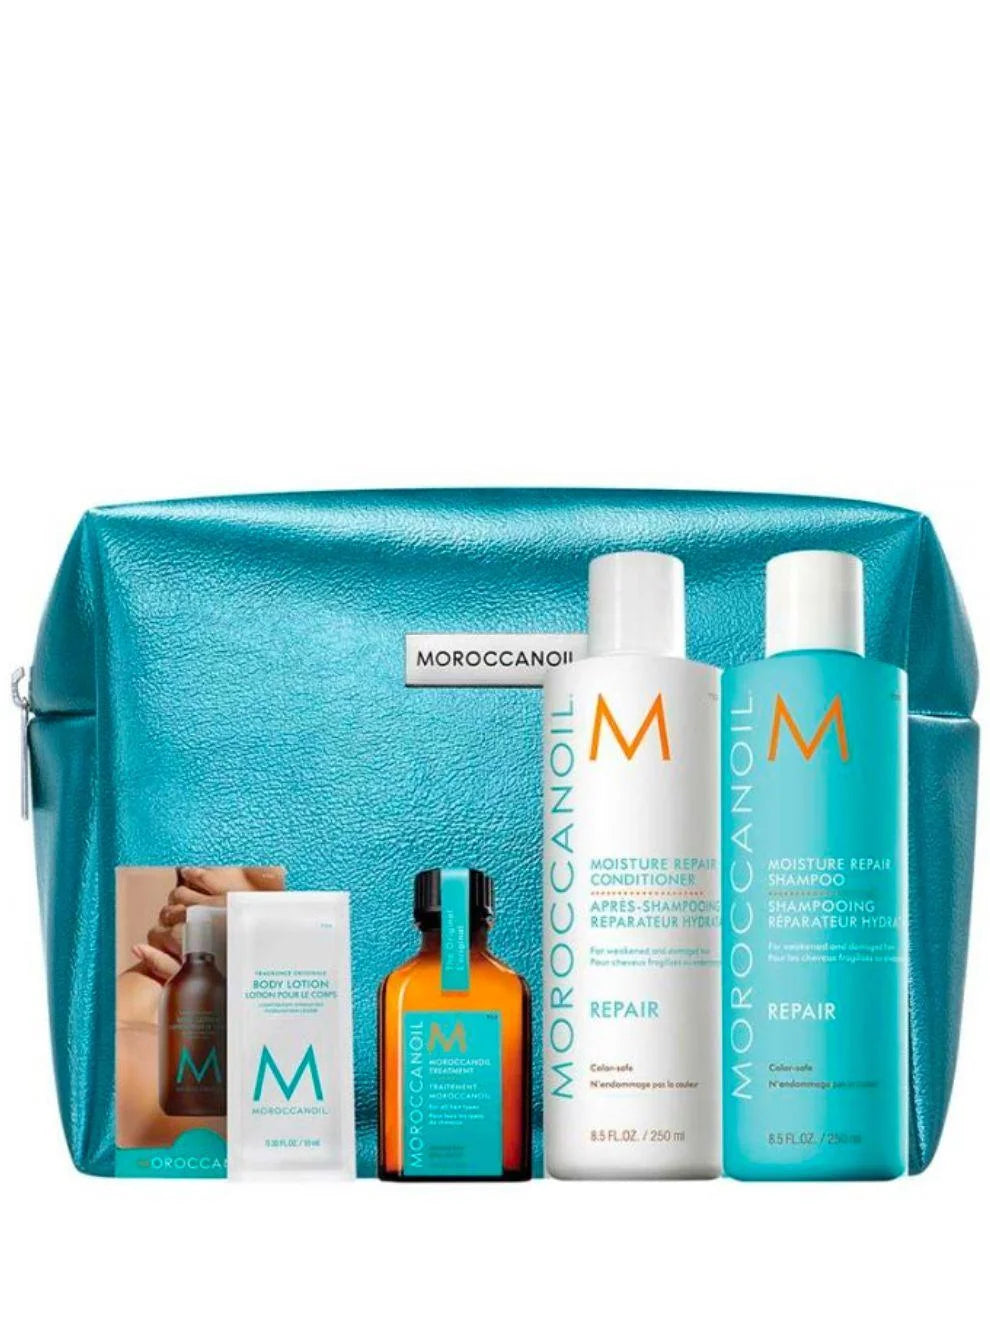 Moroccan Oil: A Window to Repair Christmas Gift Set